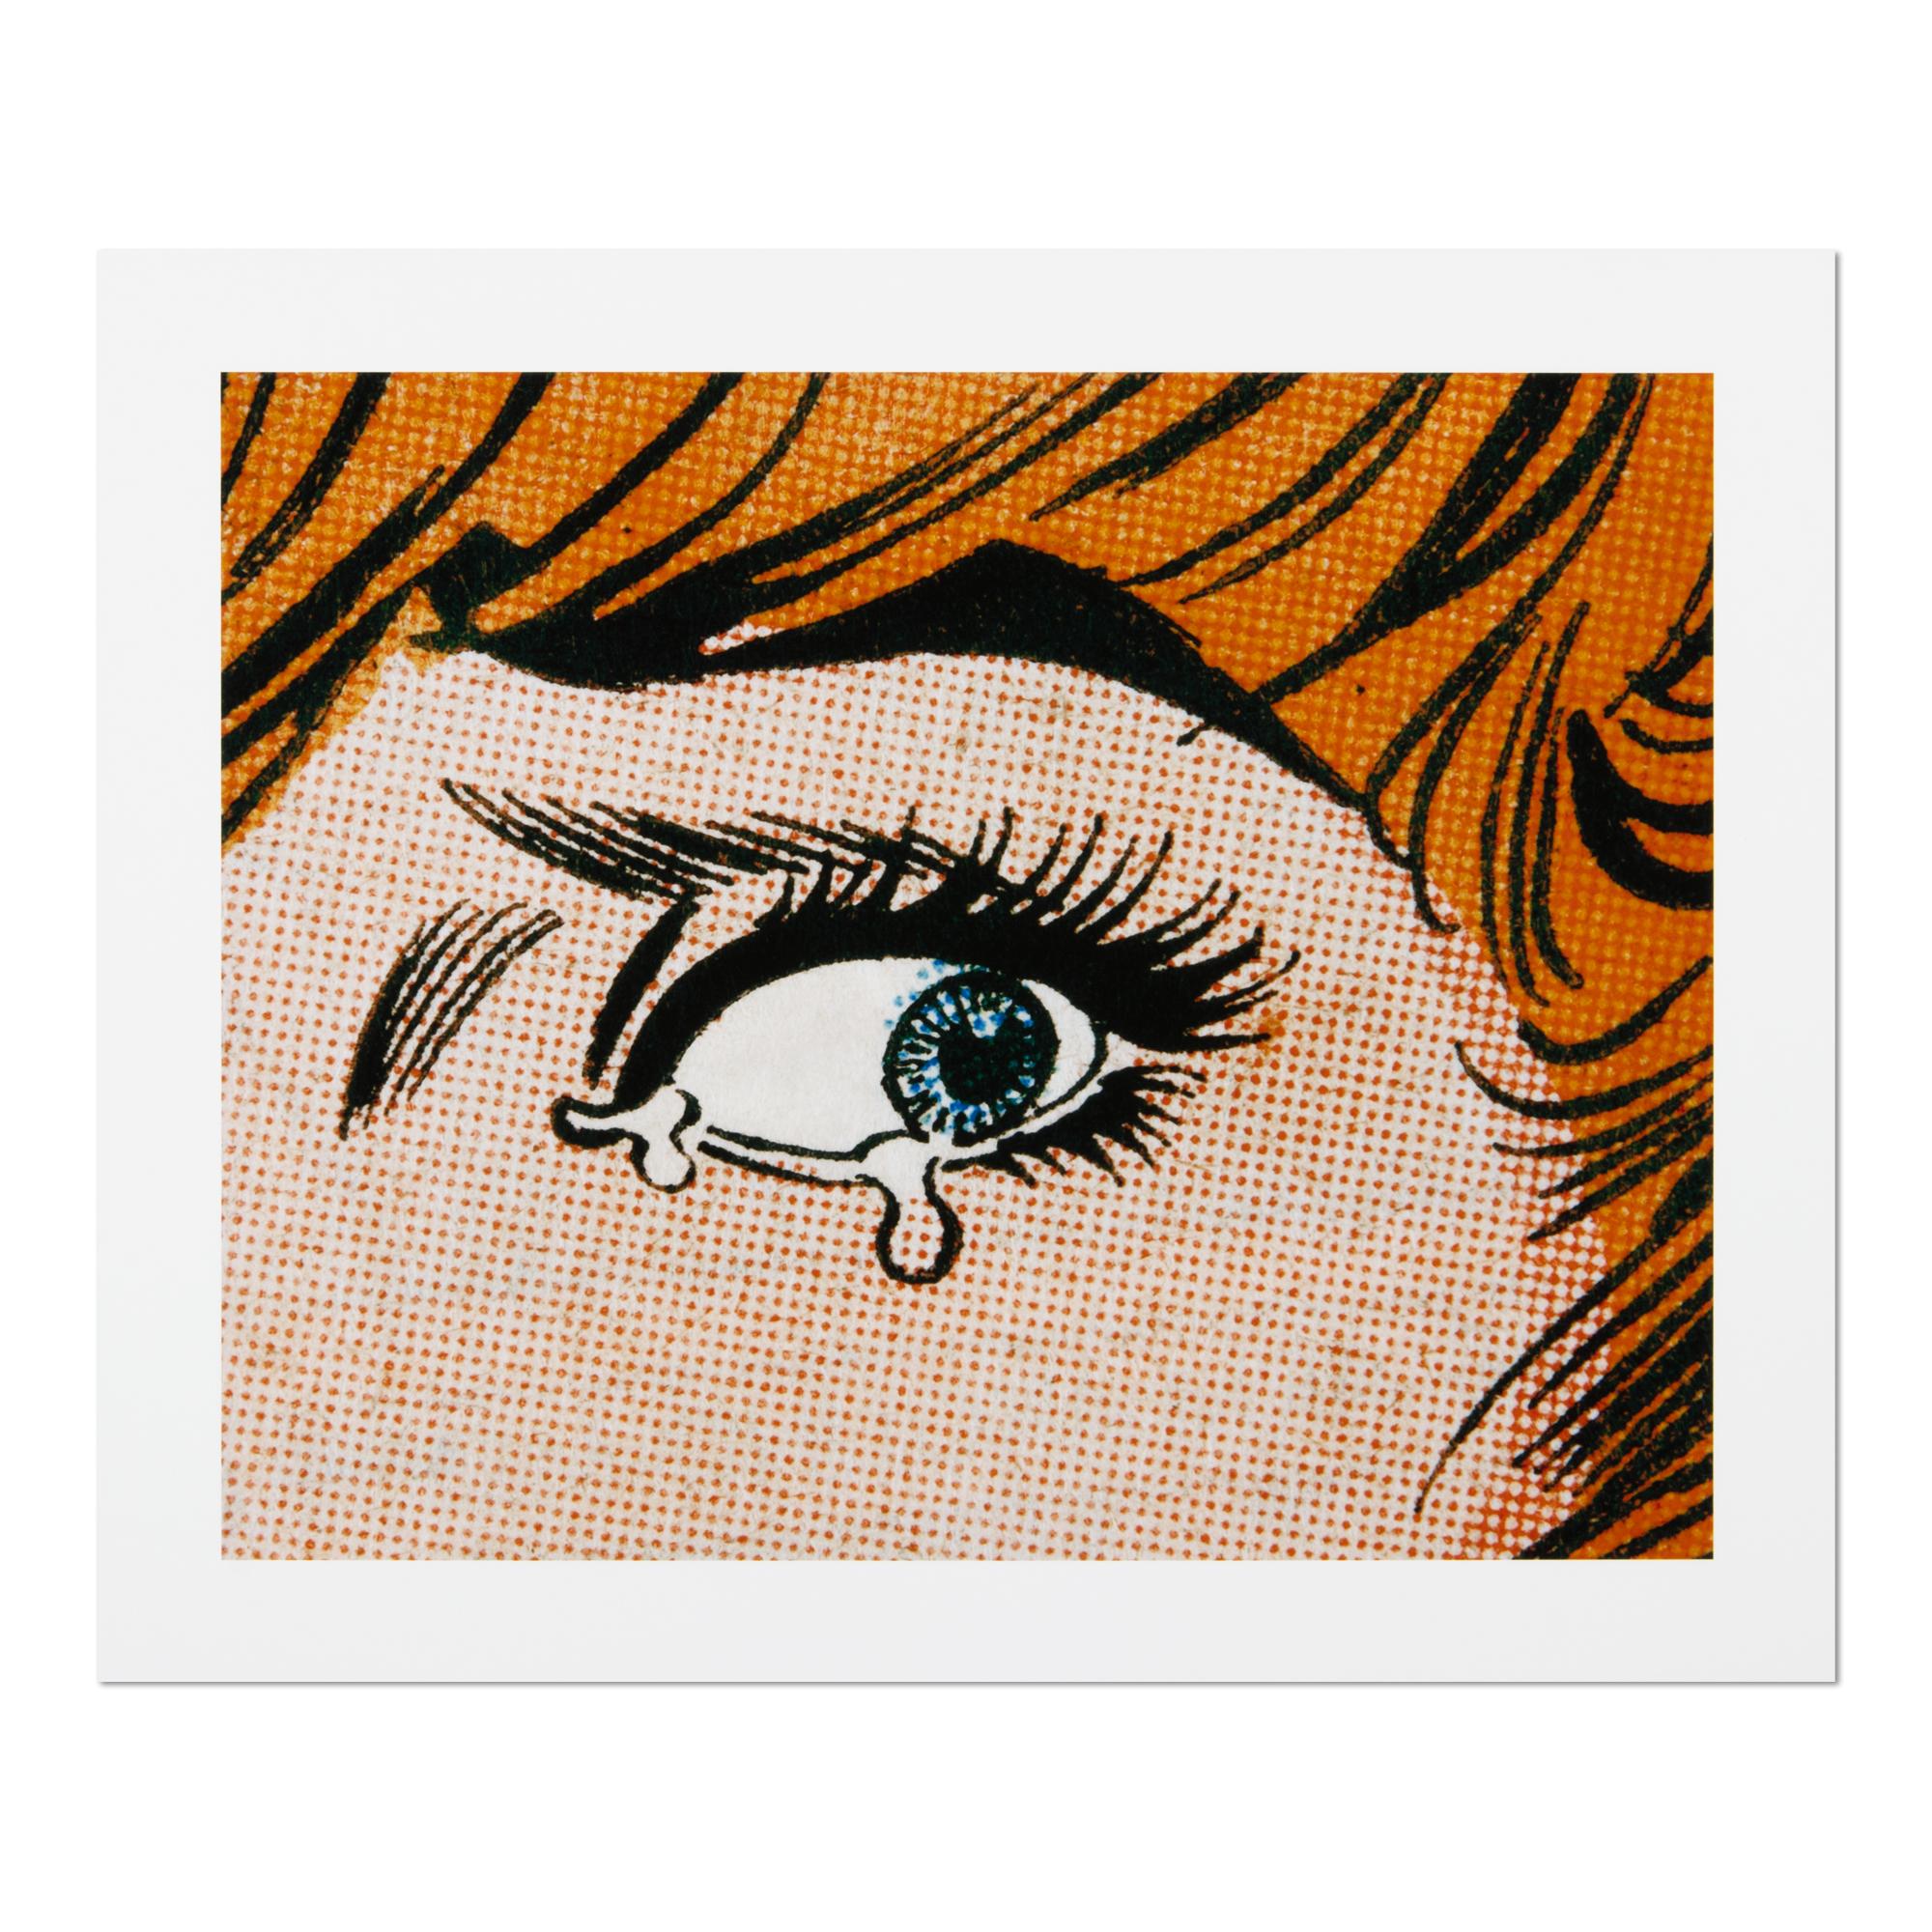 Anne Collier (American, b. 1970)
Woman Crying, 2020
Medium: Ditone print on paper
Dimensions: 37.1 x 45 cm (14.6 x 17.7 in)
Edition of 100: Hand-signed and numbered
Condition: Mint